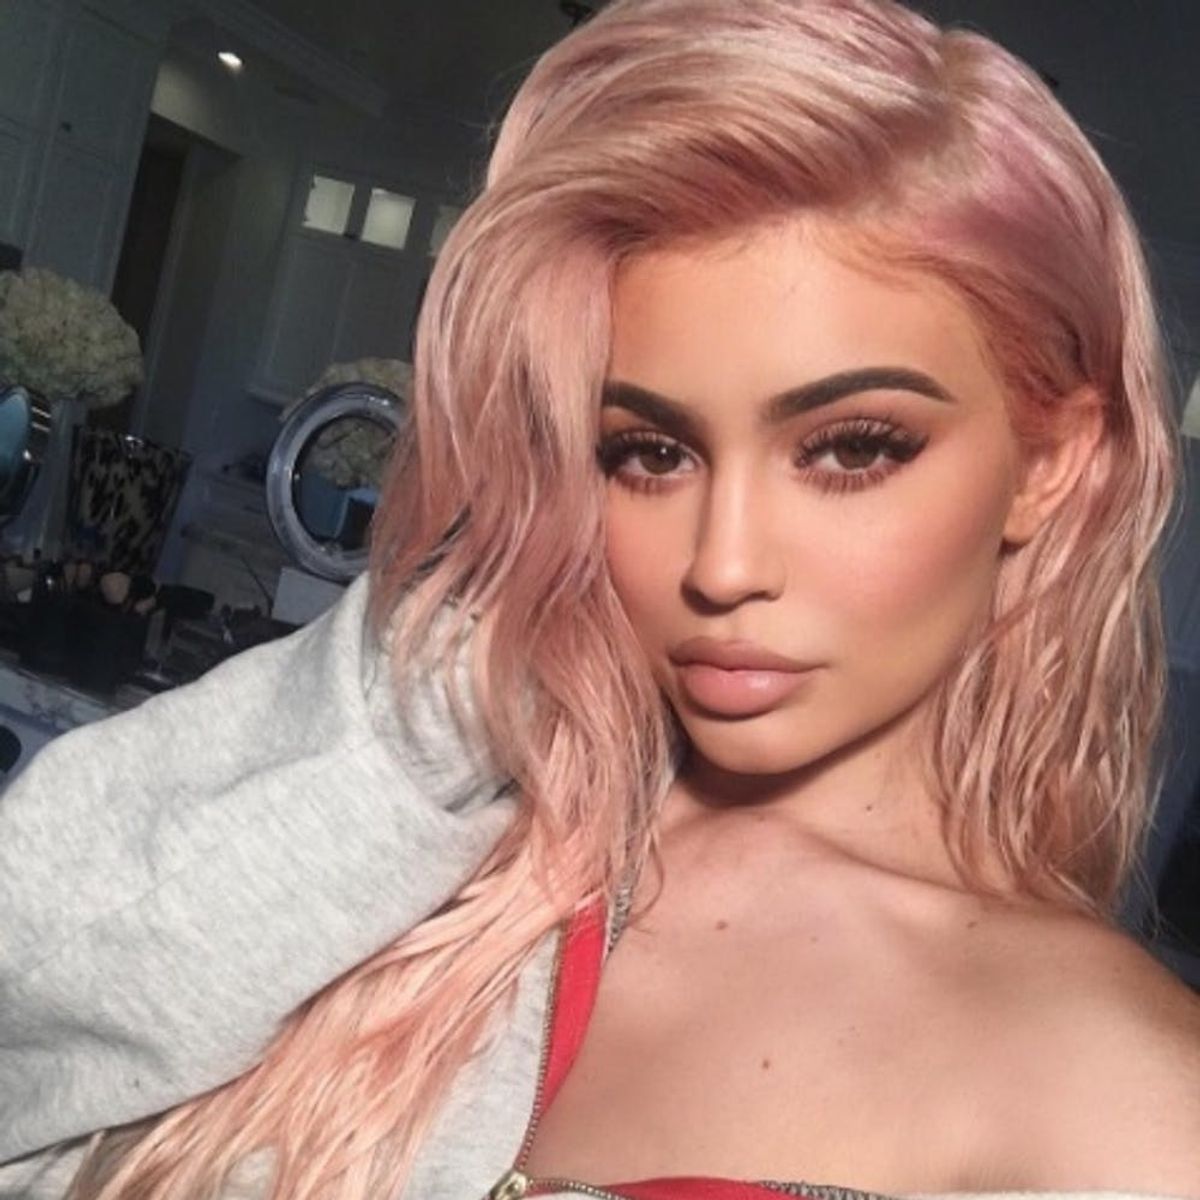 Knockoff Websites Are Selling Fake (and Dangerous!) Kylie Jenner Lip Kits